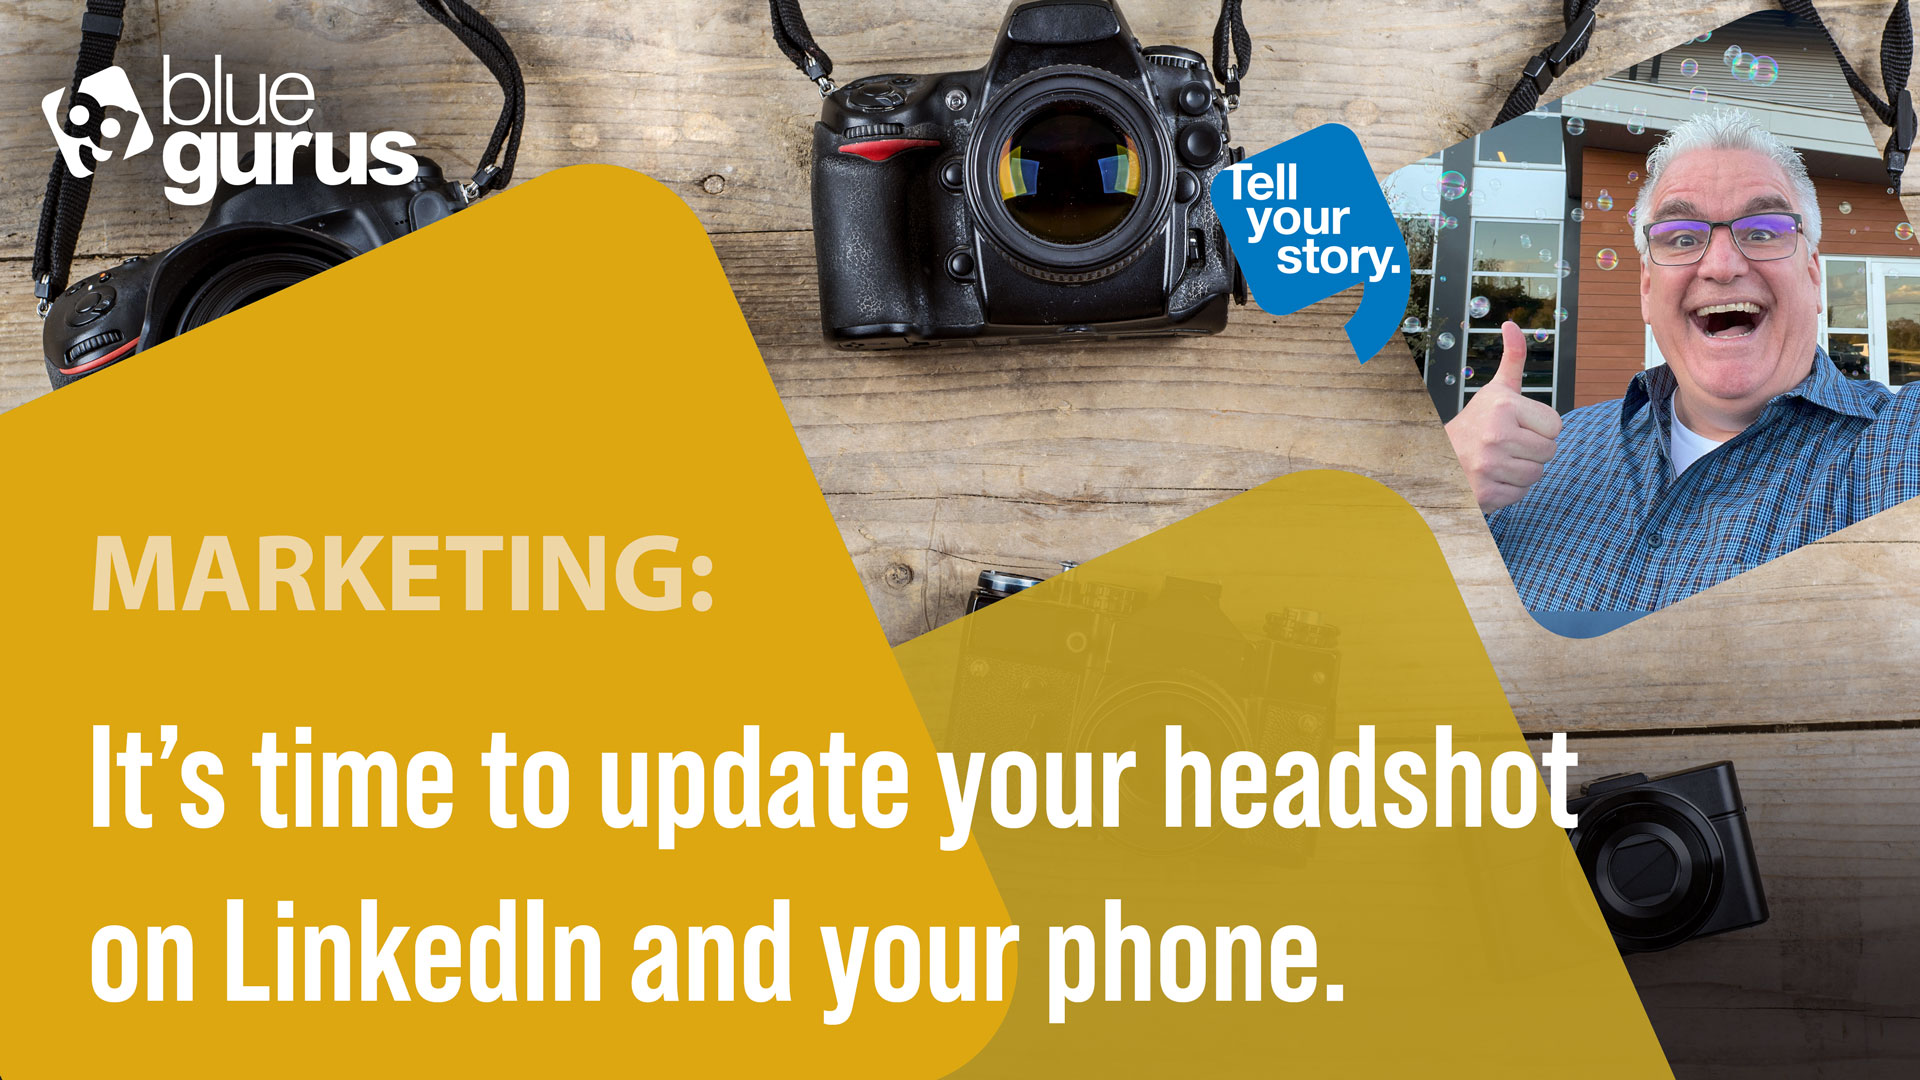 It’s time to update your headshot on LinkedIn and your phone.